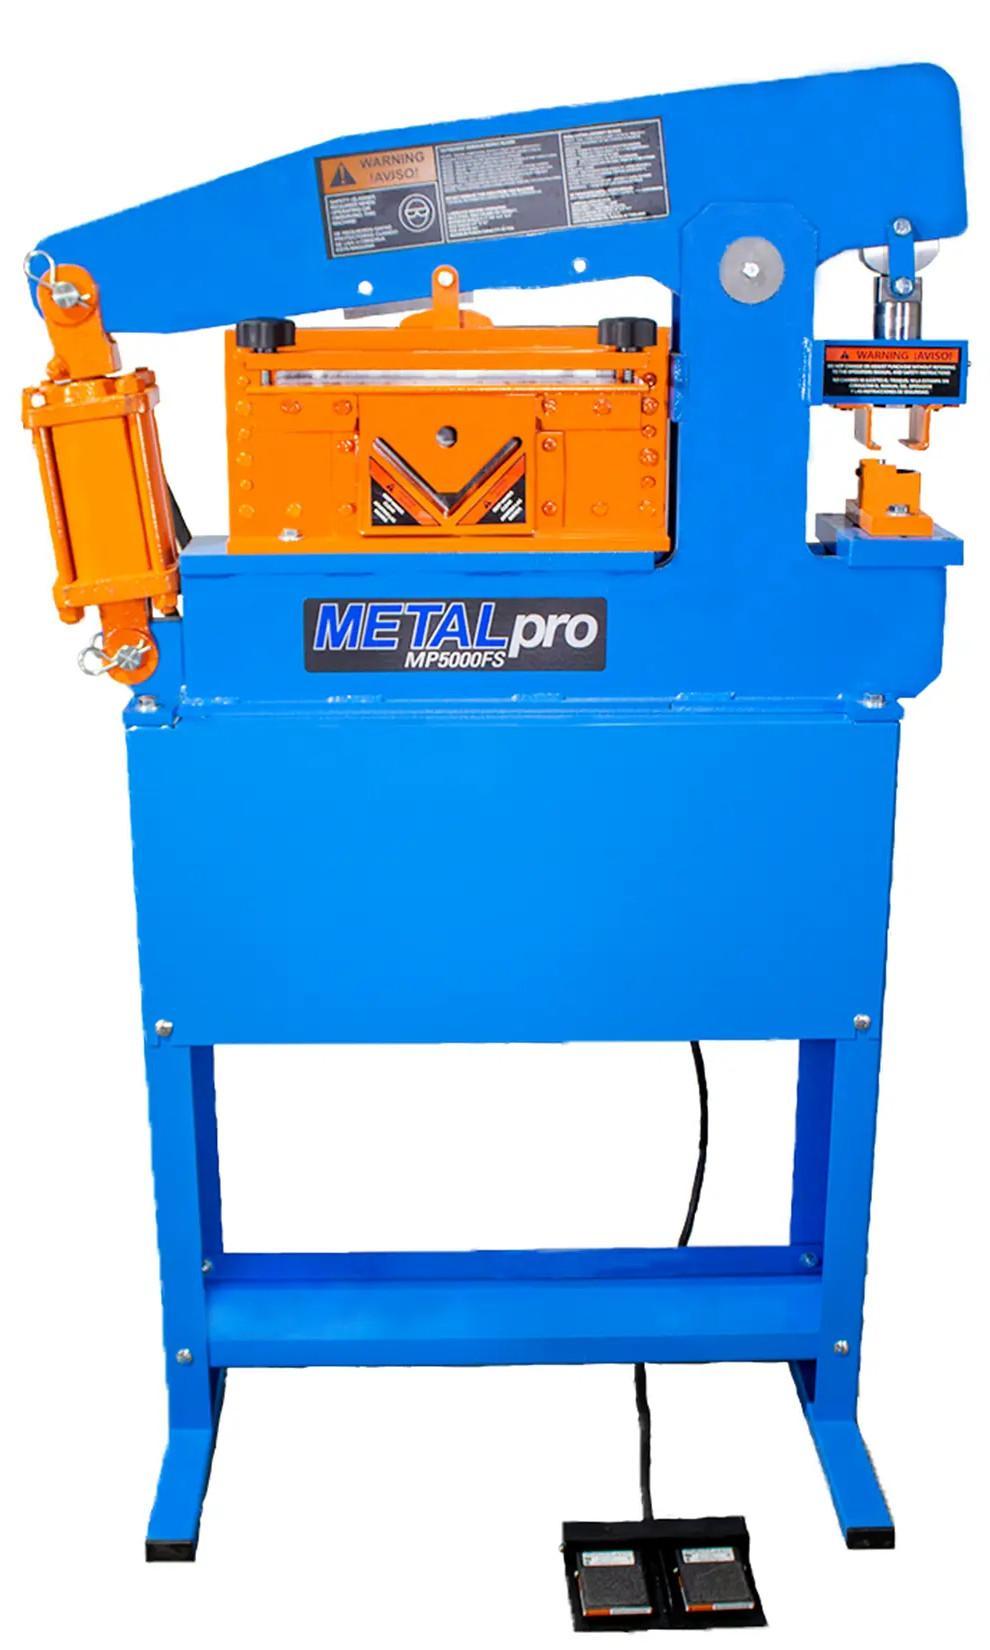 50 TON IRONWORKER, 1-12HP, 110V, WEIGHT 575 LBS, DIMS: 37 X 24 X 55-1/4